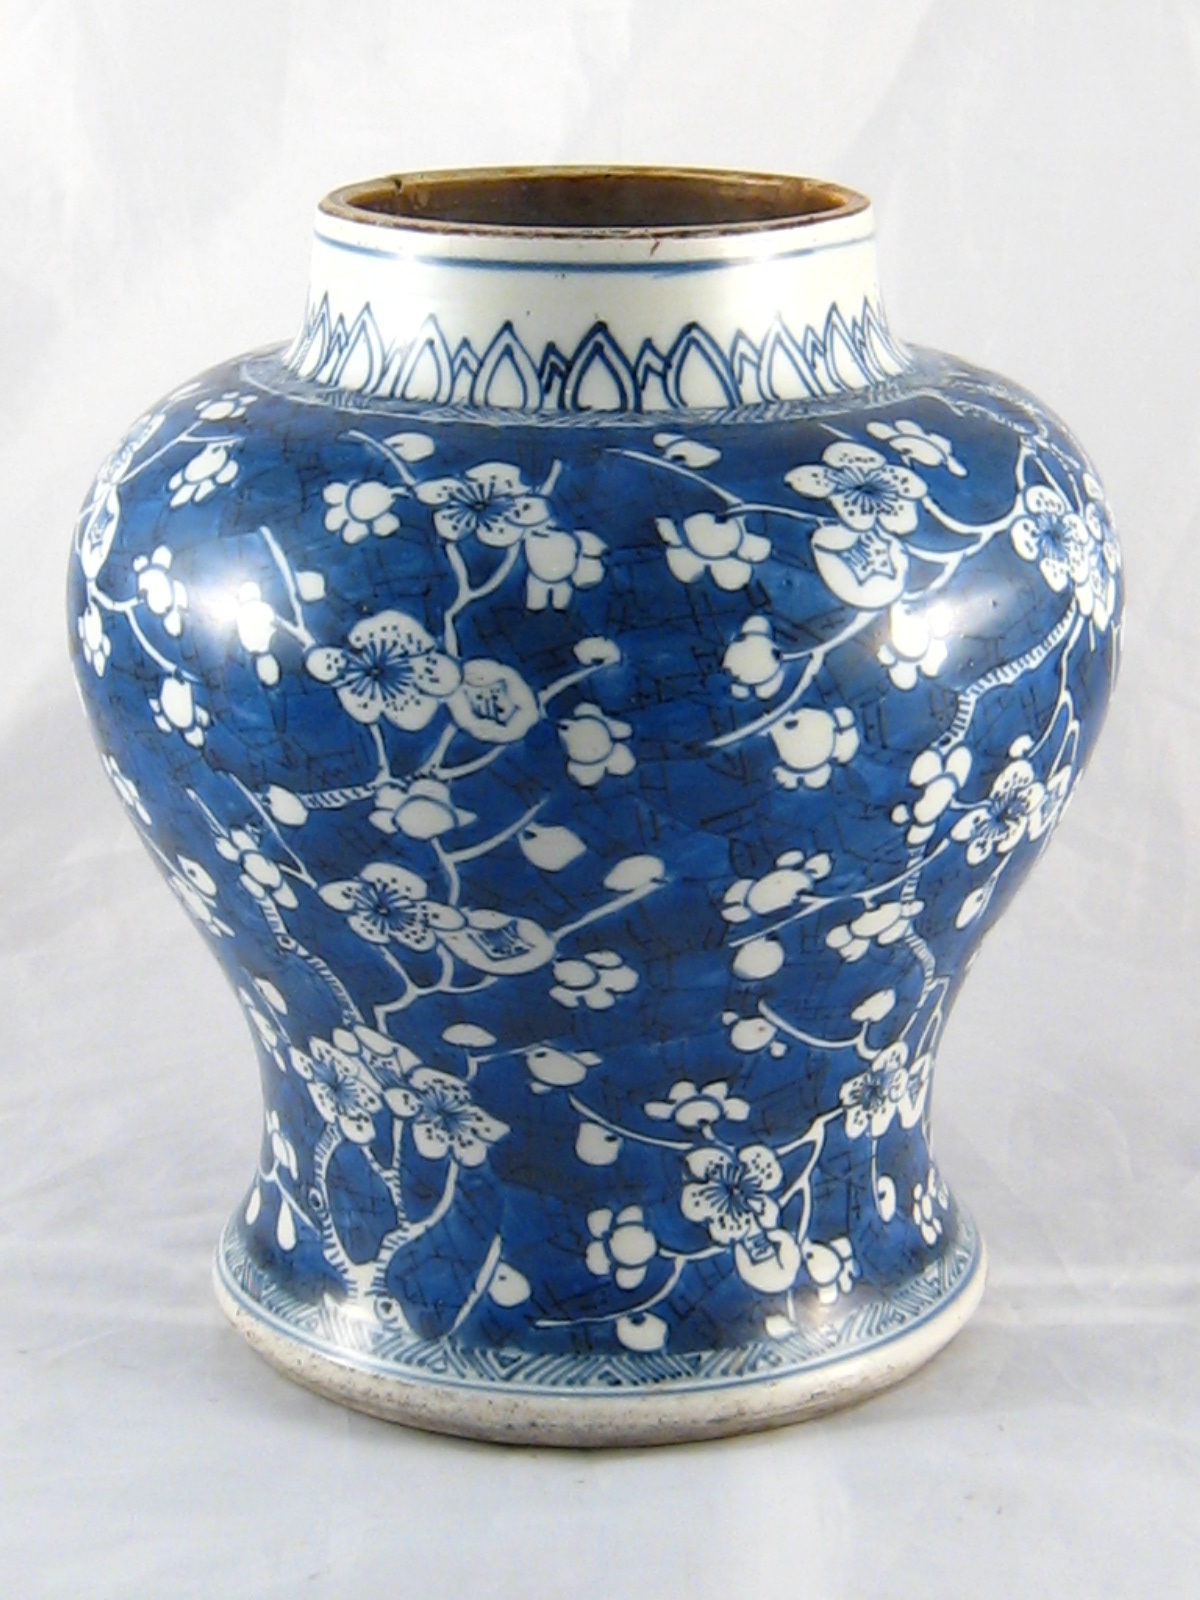 A Chinese squat baluster vase, circa 1700, with prunus on cracked ice. Repair to rim. 20cm. across.